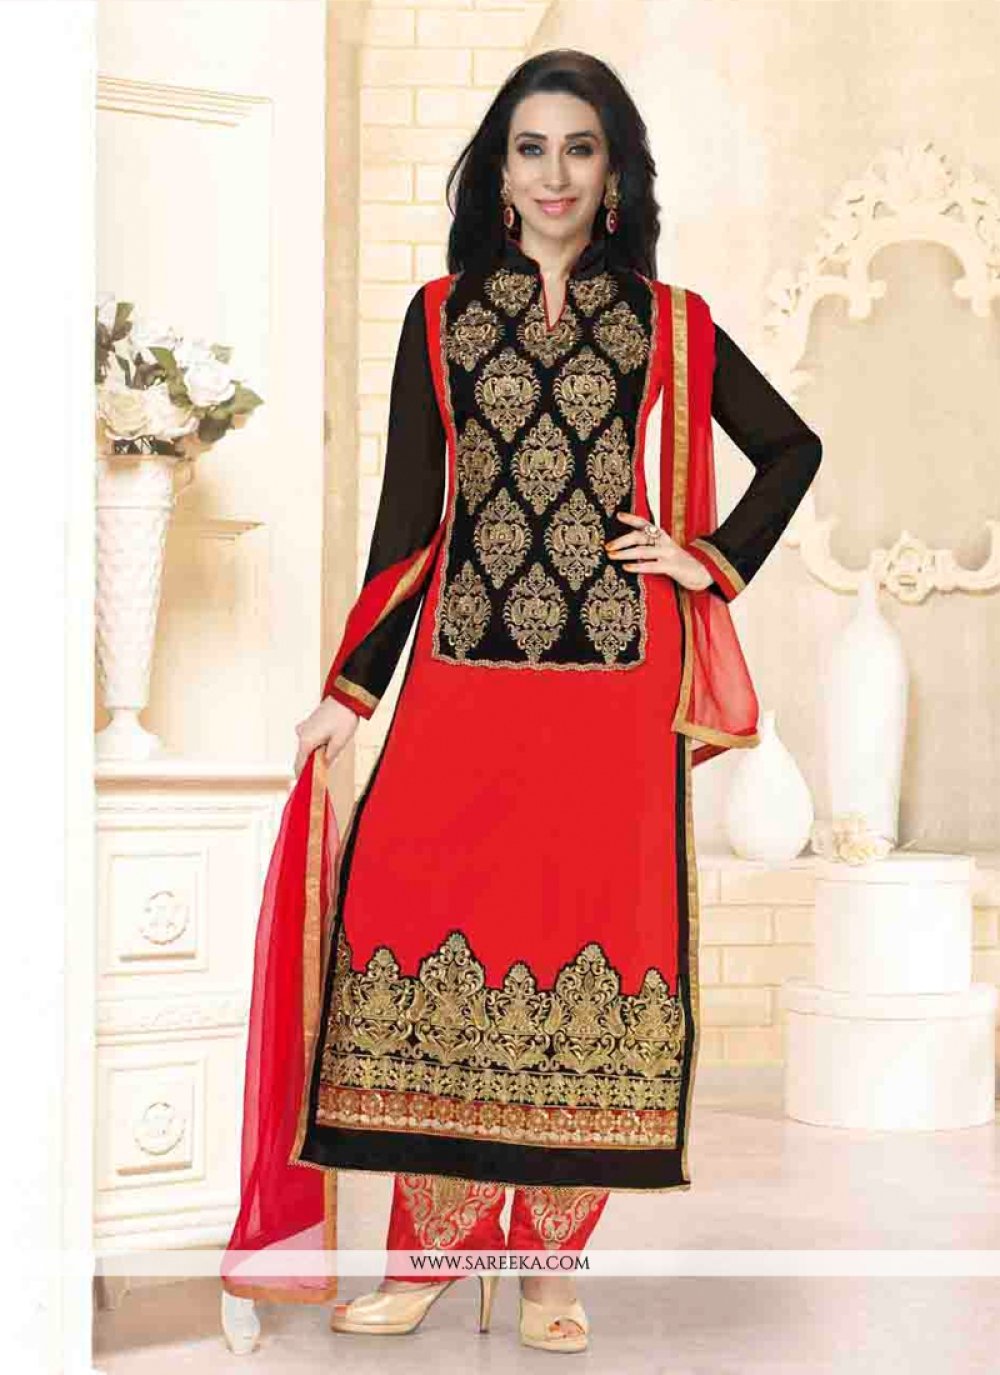 Buy Embroidered Red Black Cotton Salwar Suit with Jaipuri Dupatta Online in  India at Lowest Prices - Price in India - buysnip.com